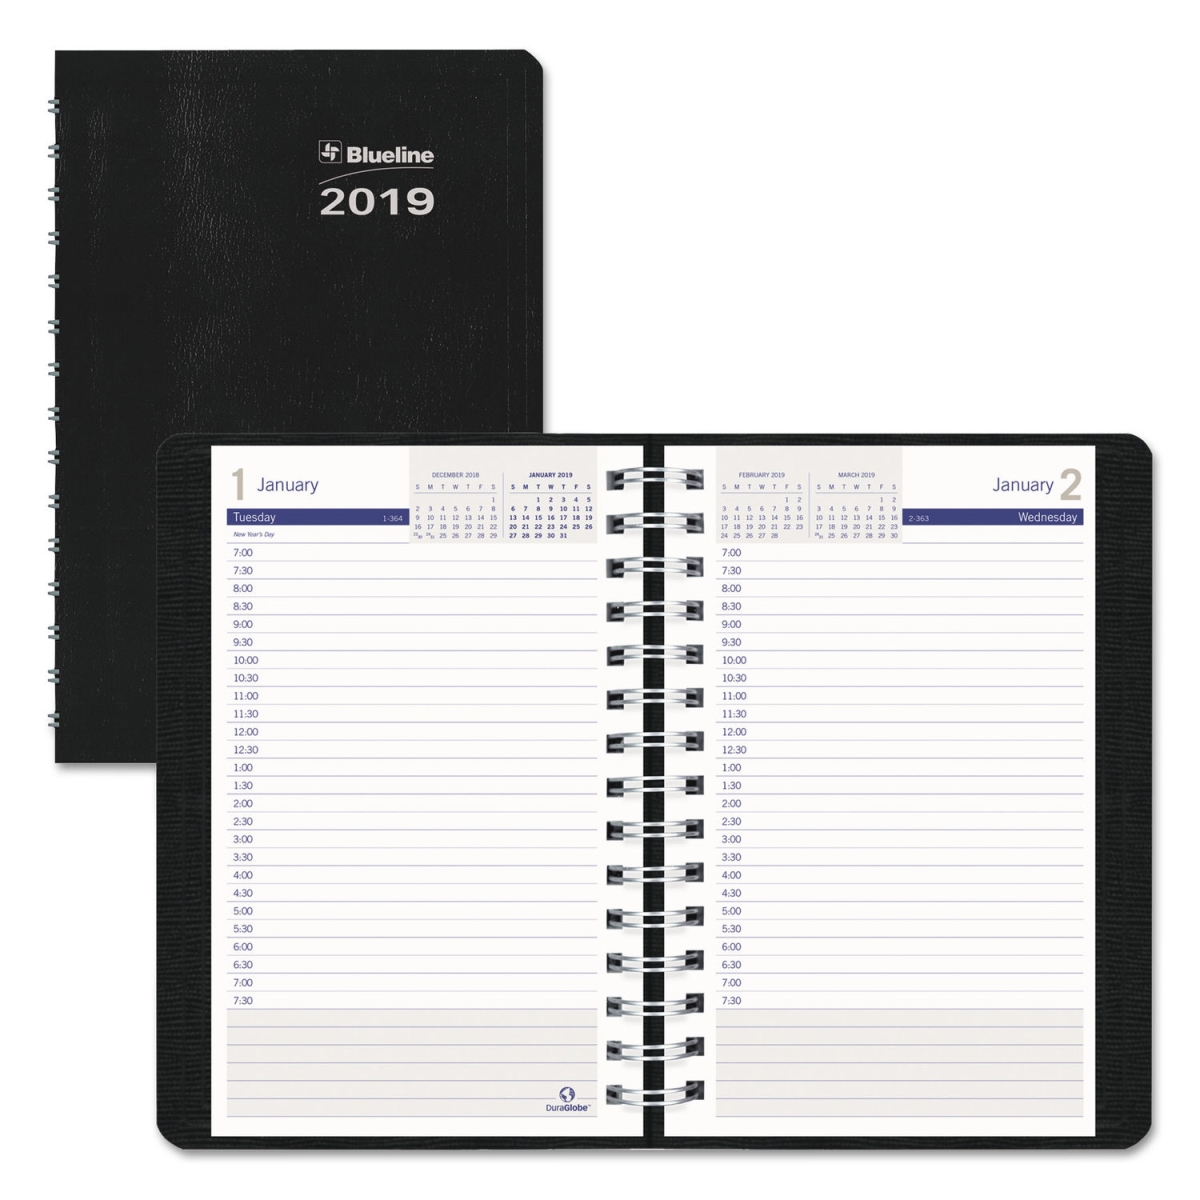 Redc21021t Duraglobe Daily Planner Ruled For 30-minute Appointments For 2019, Black - 8 X 5 In.